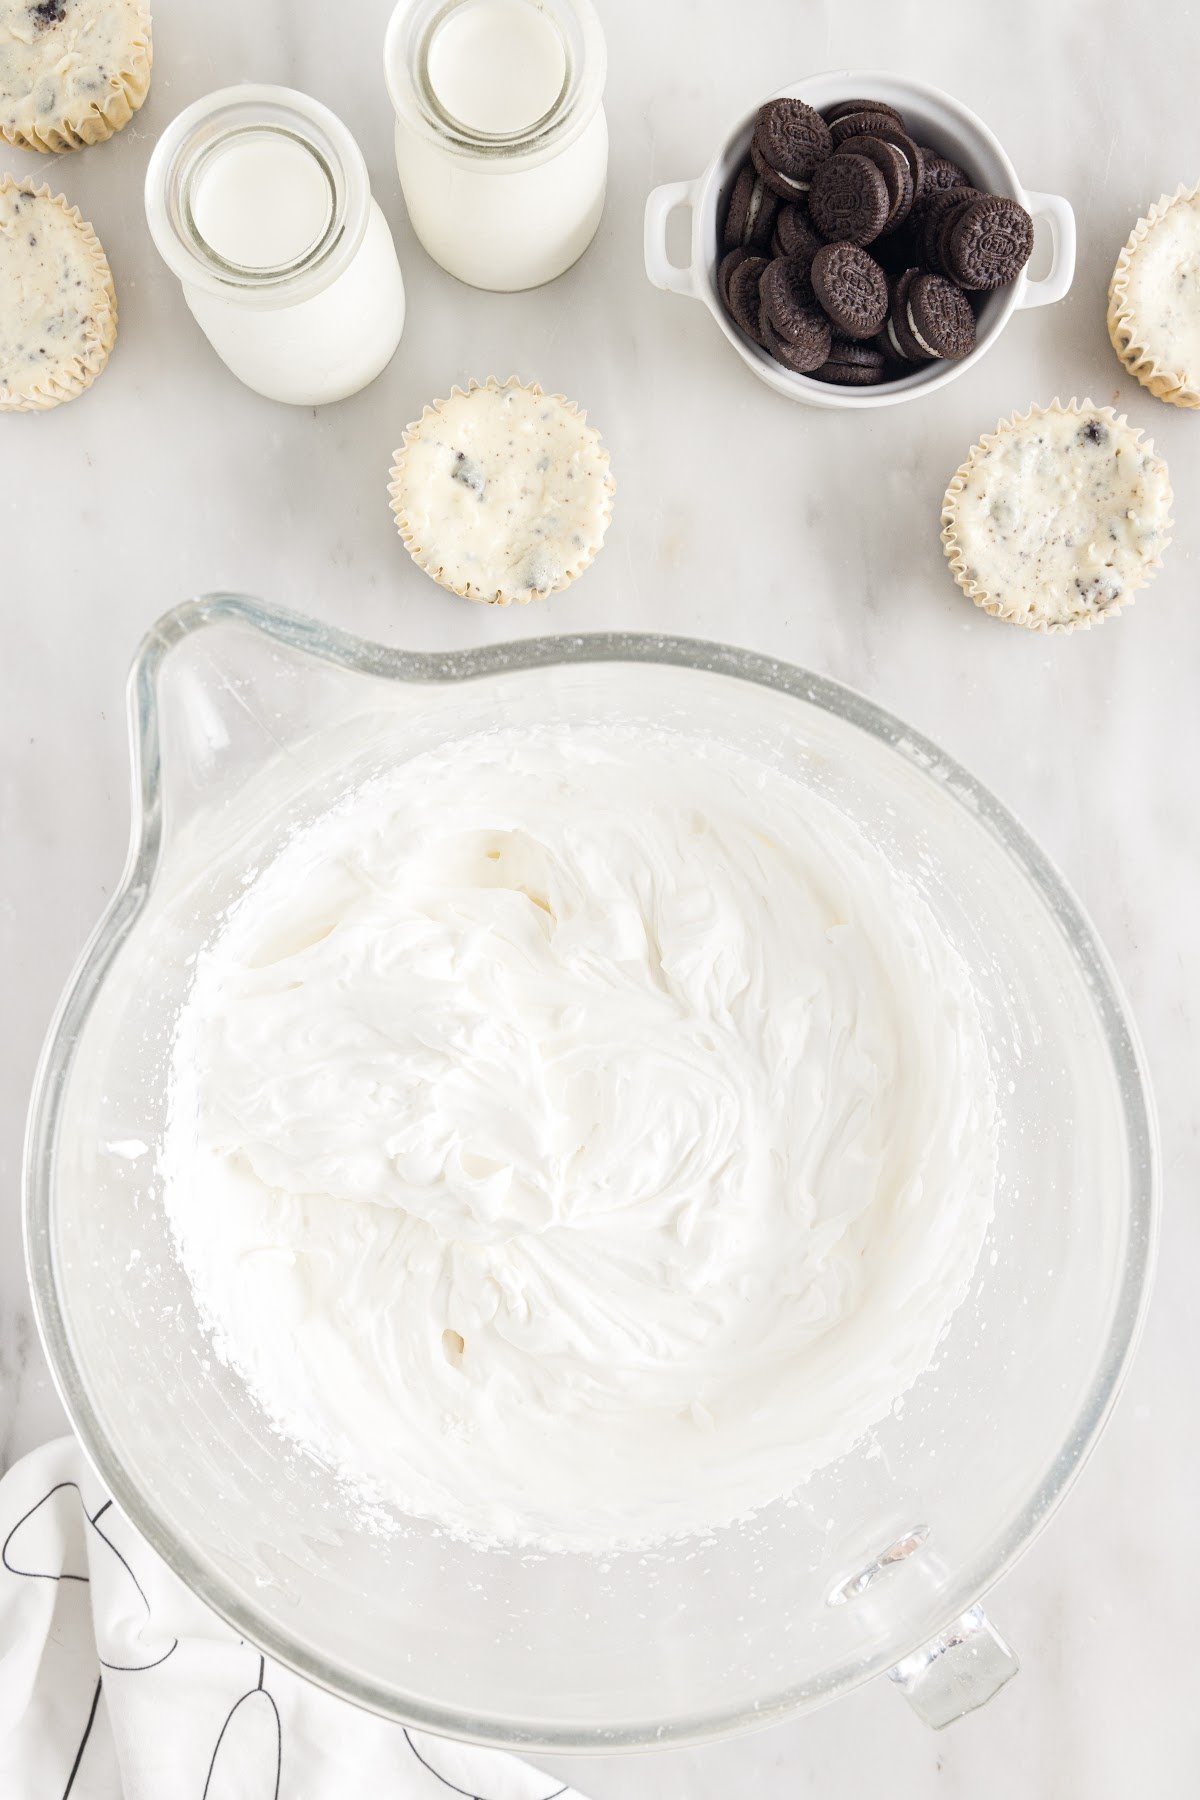 Whipped cream topping ingredients in a large bowl.